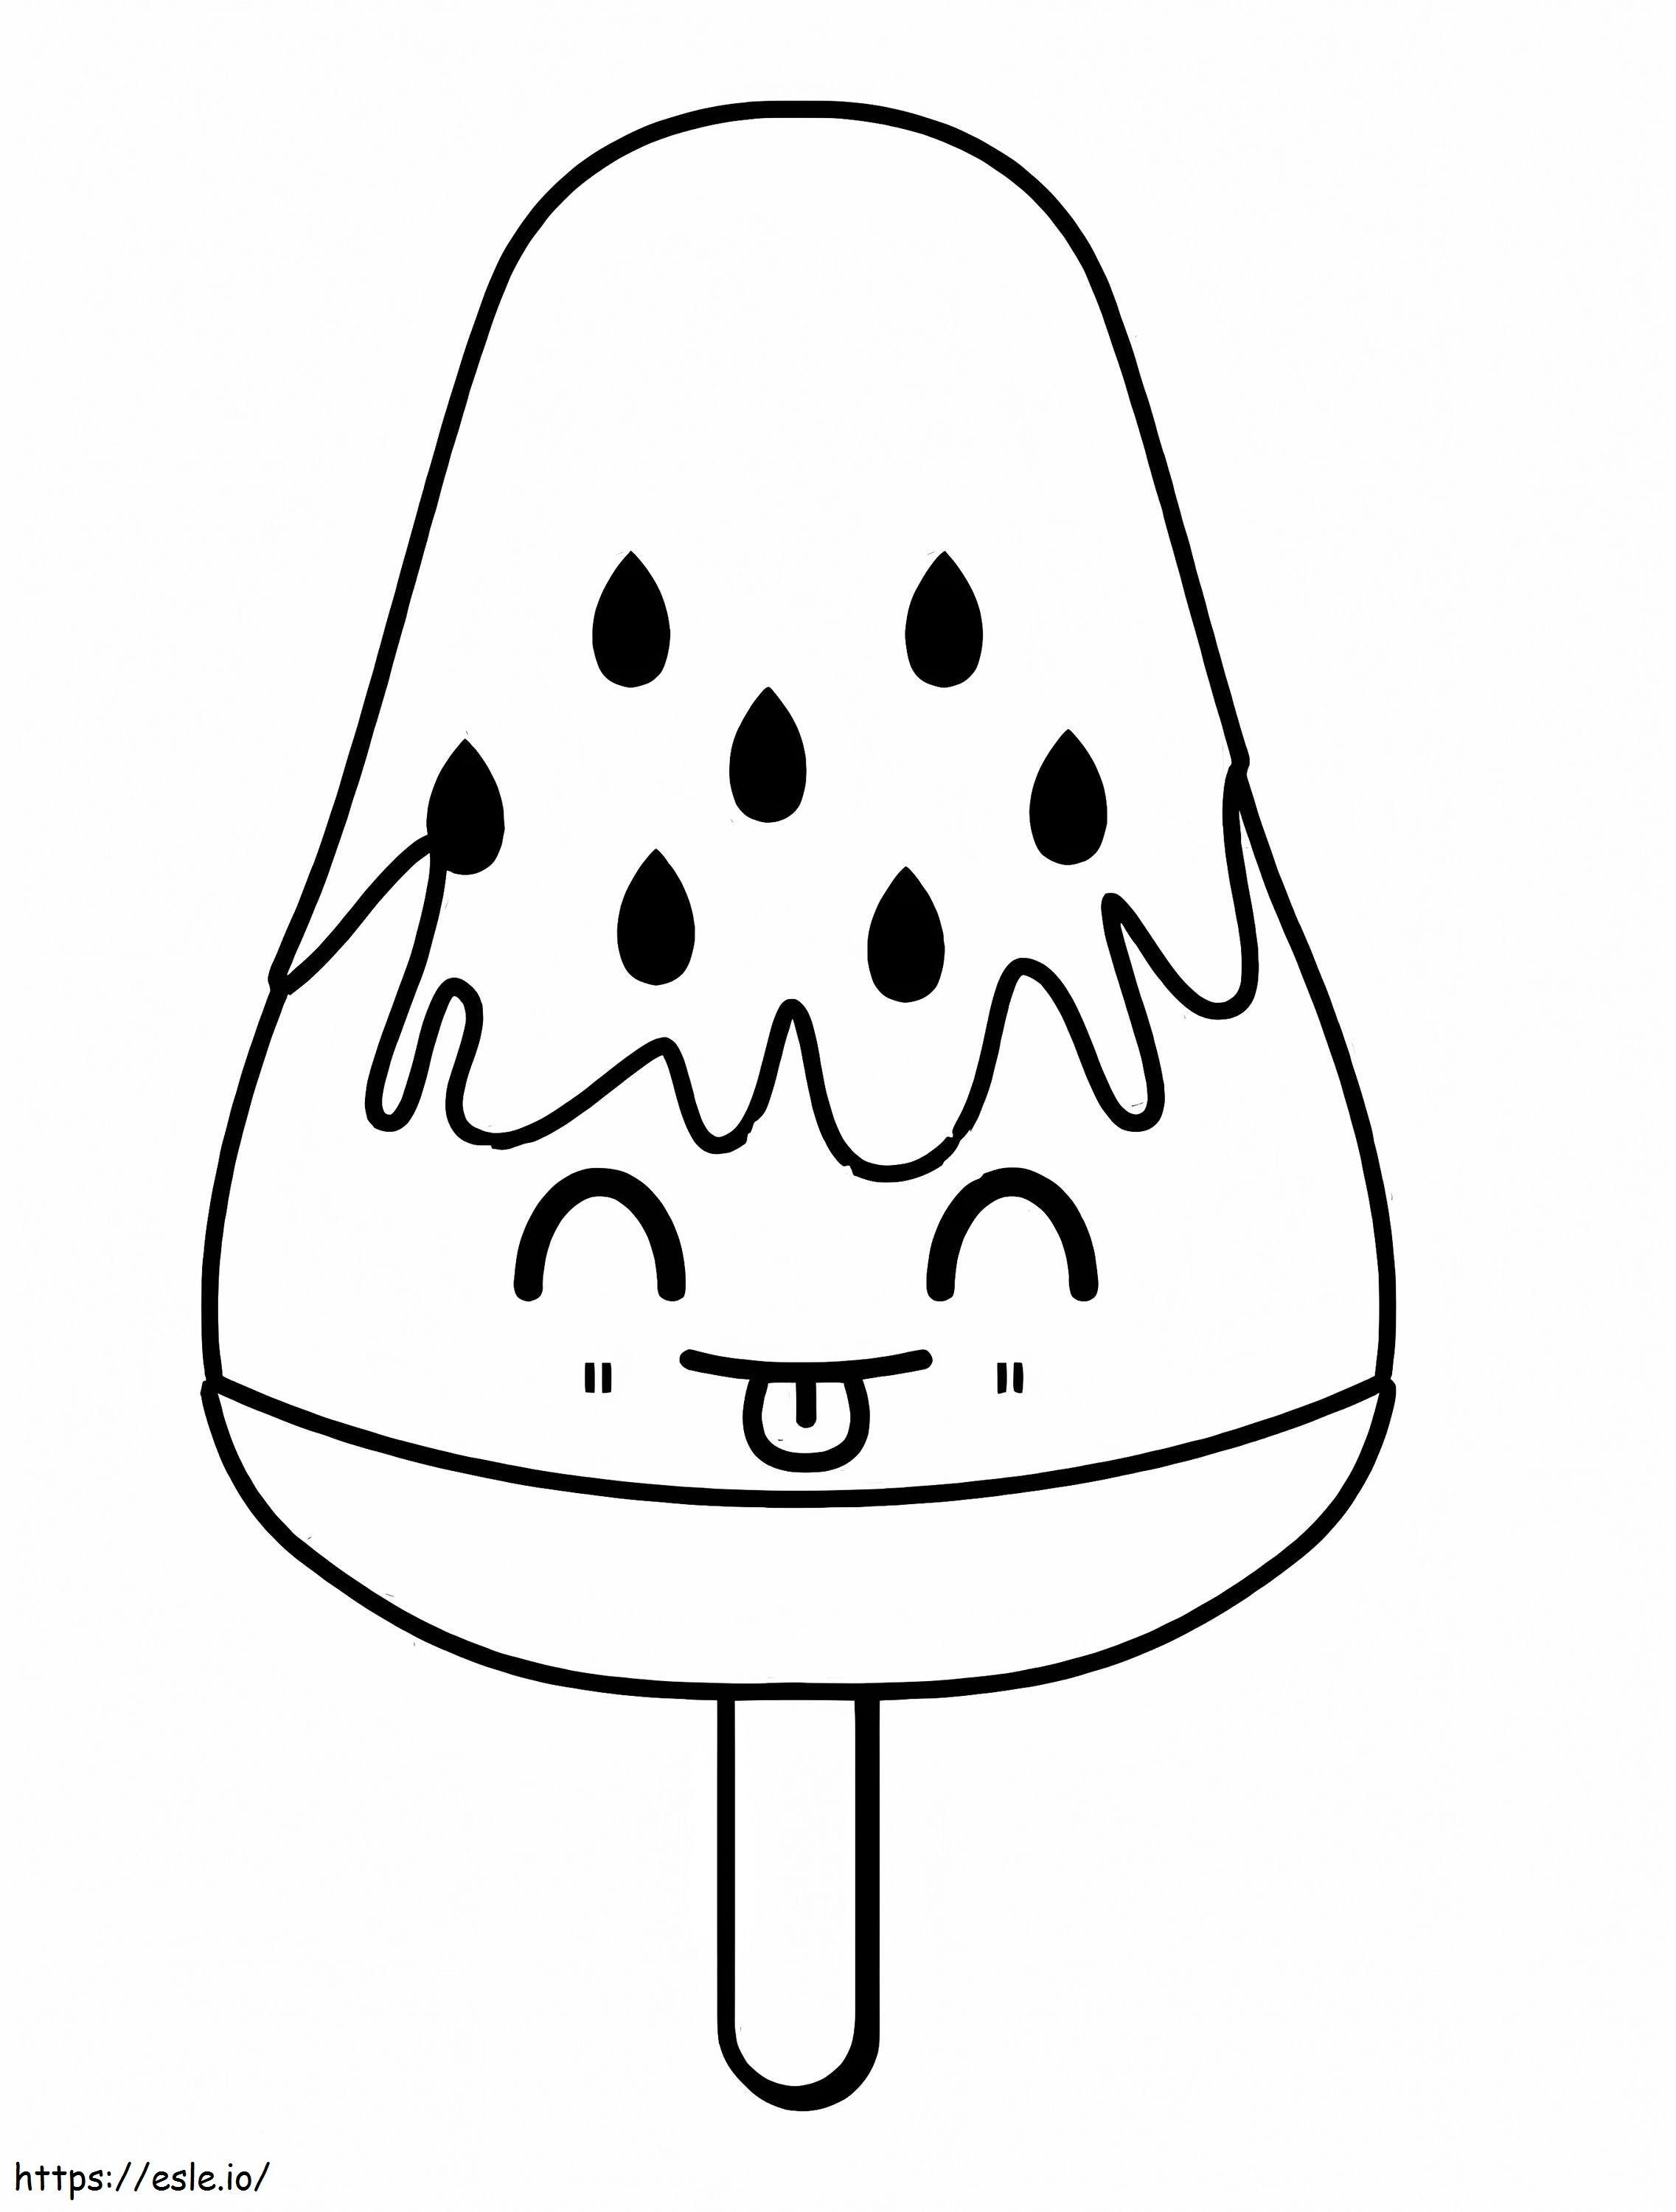 Adorable Popsicle coloring page